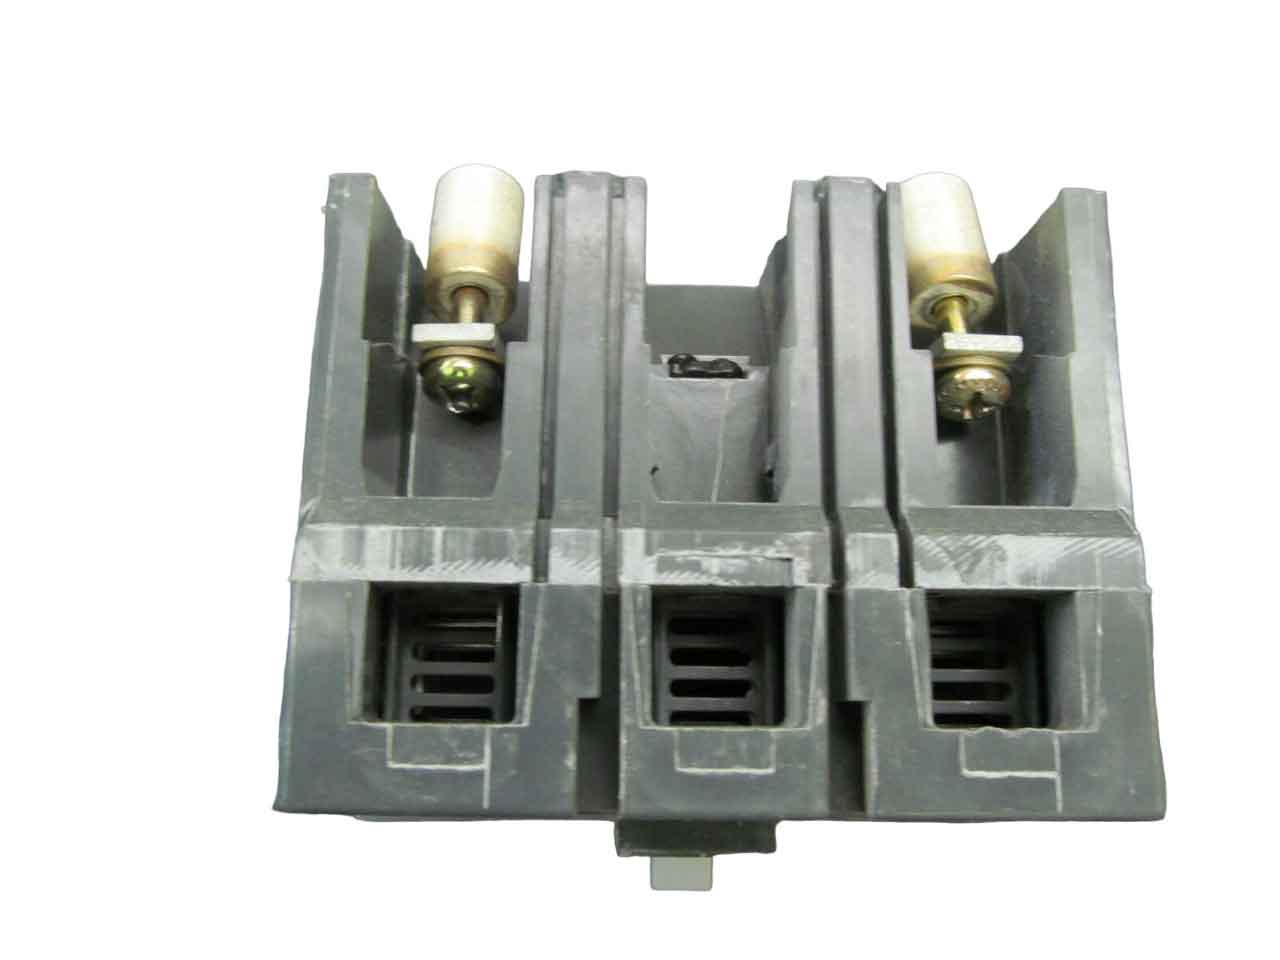 SEHA24AT0150 - General Electrics - Molded Case Circuit Breakers